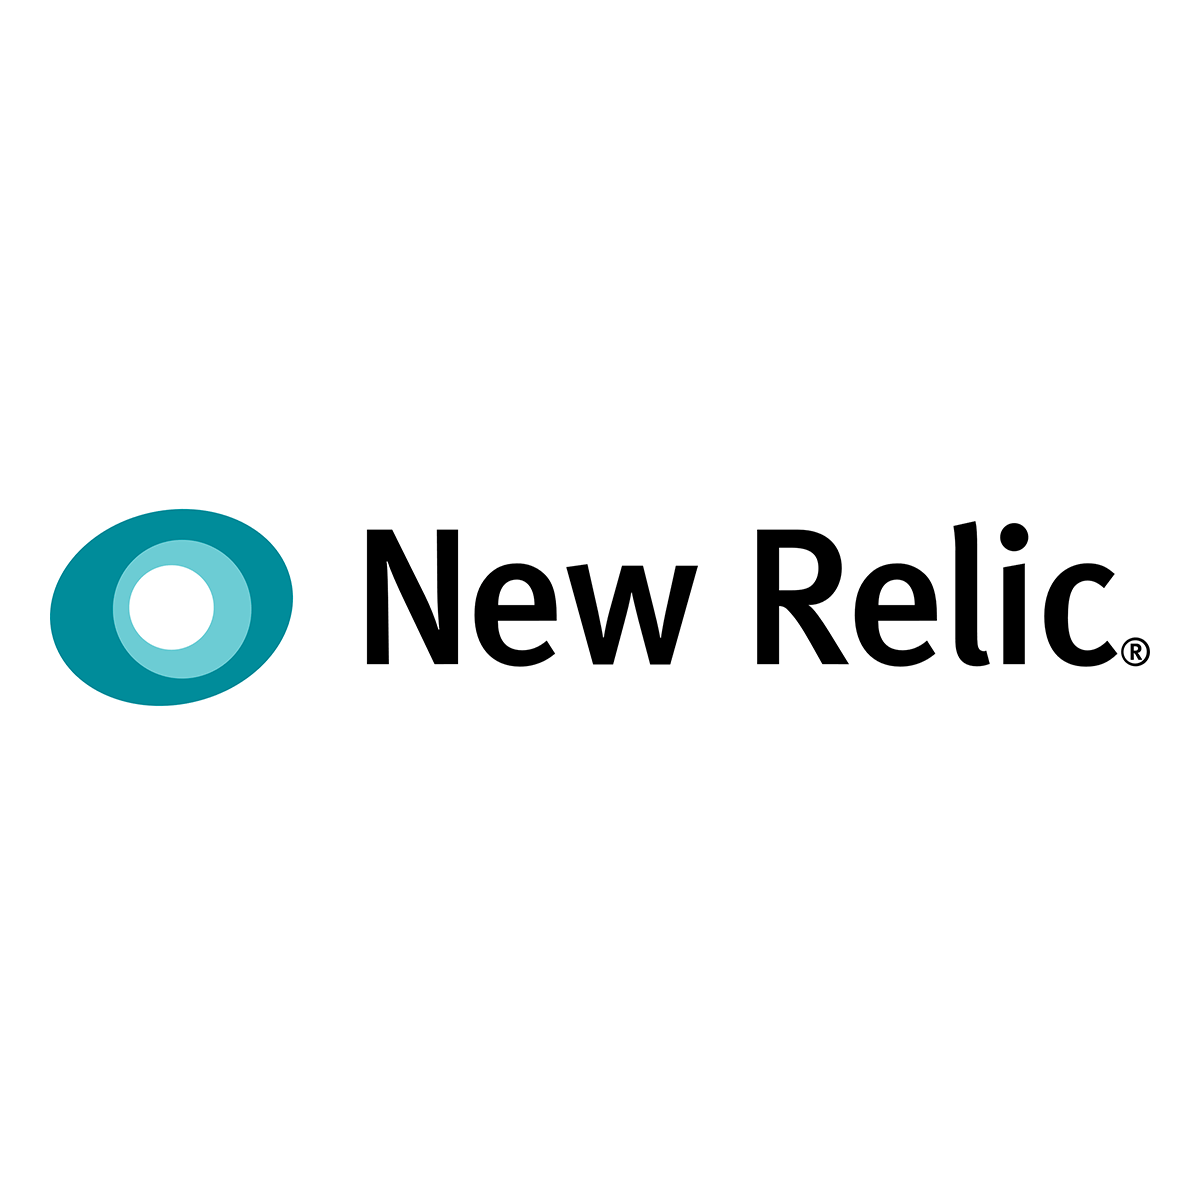 Relic Logo - Media Assets and Official New Relic Logos | About New Relic